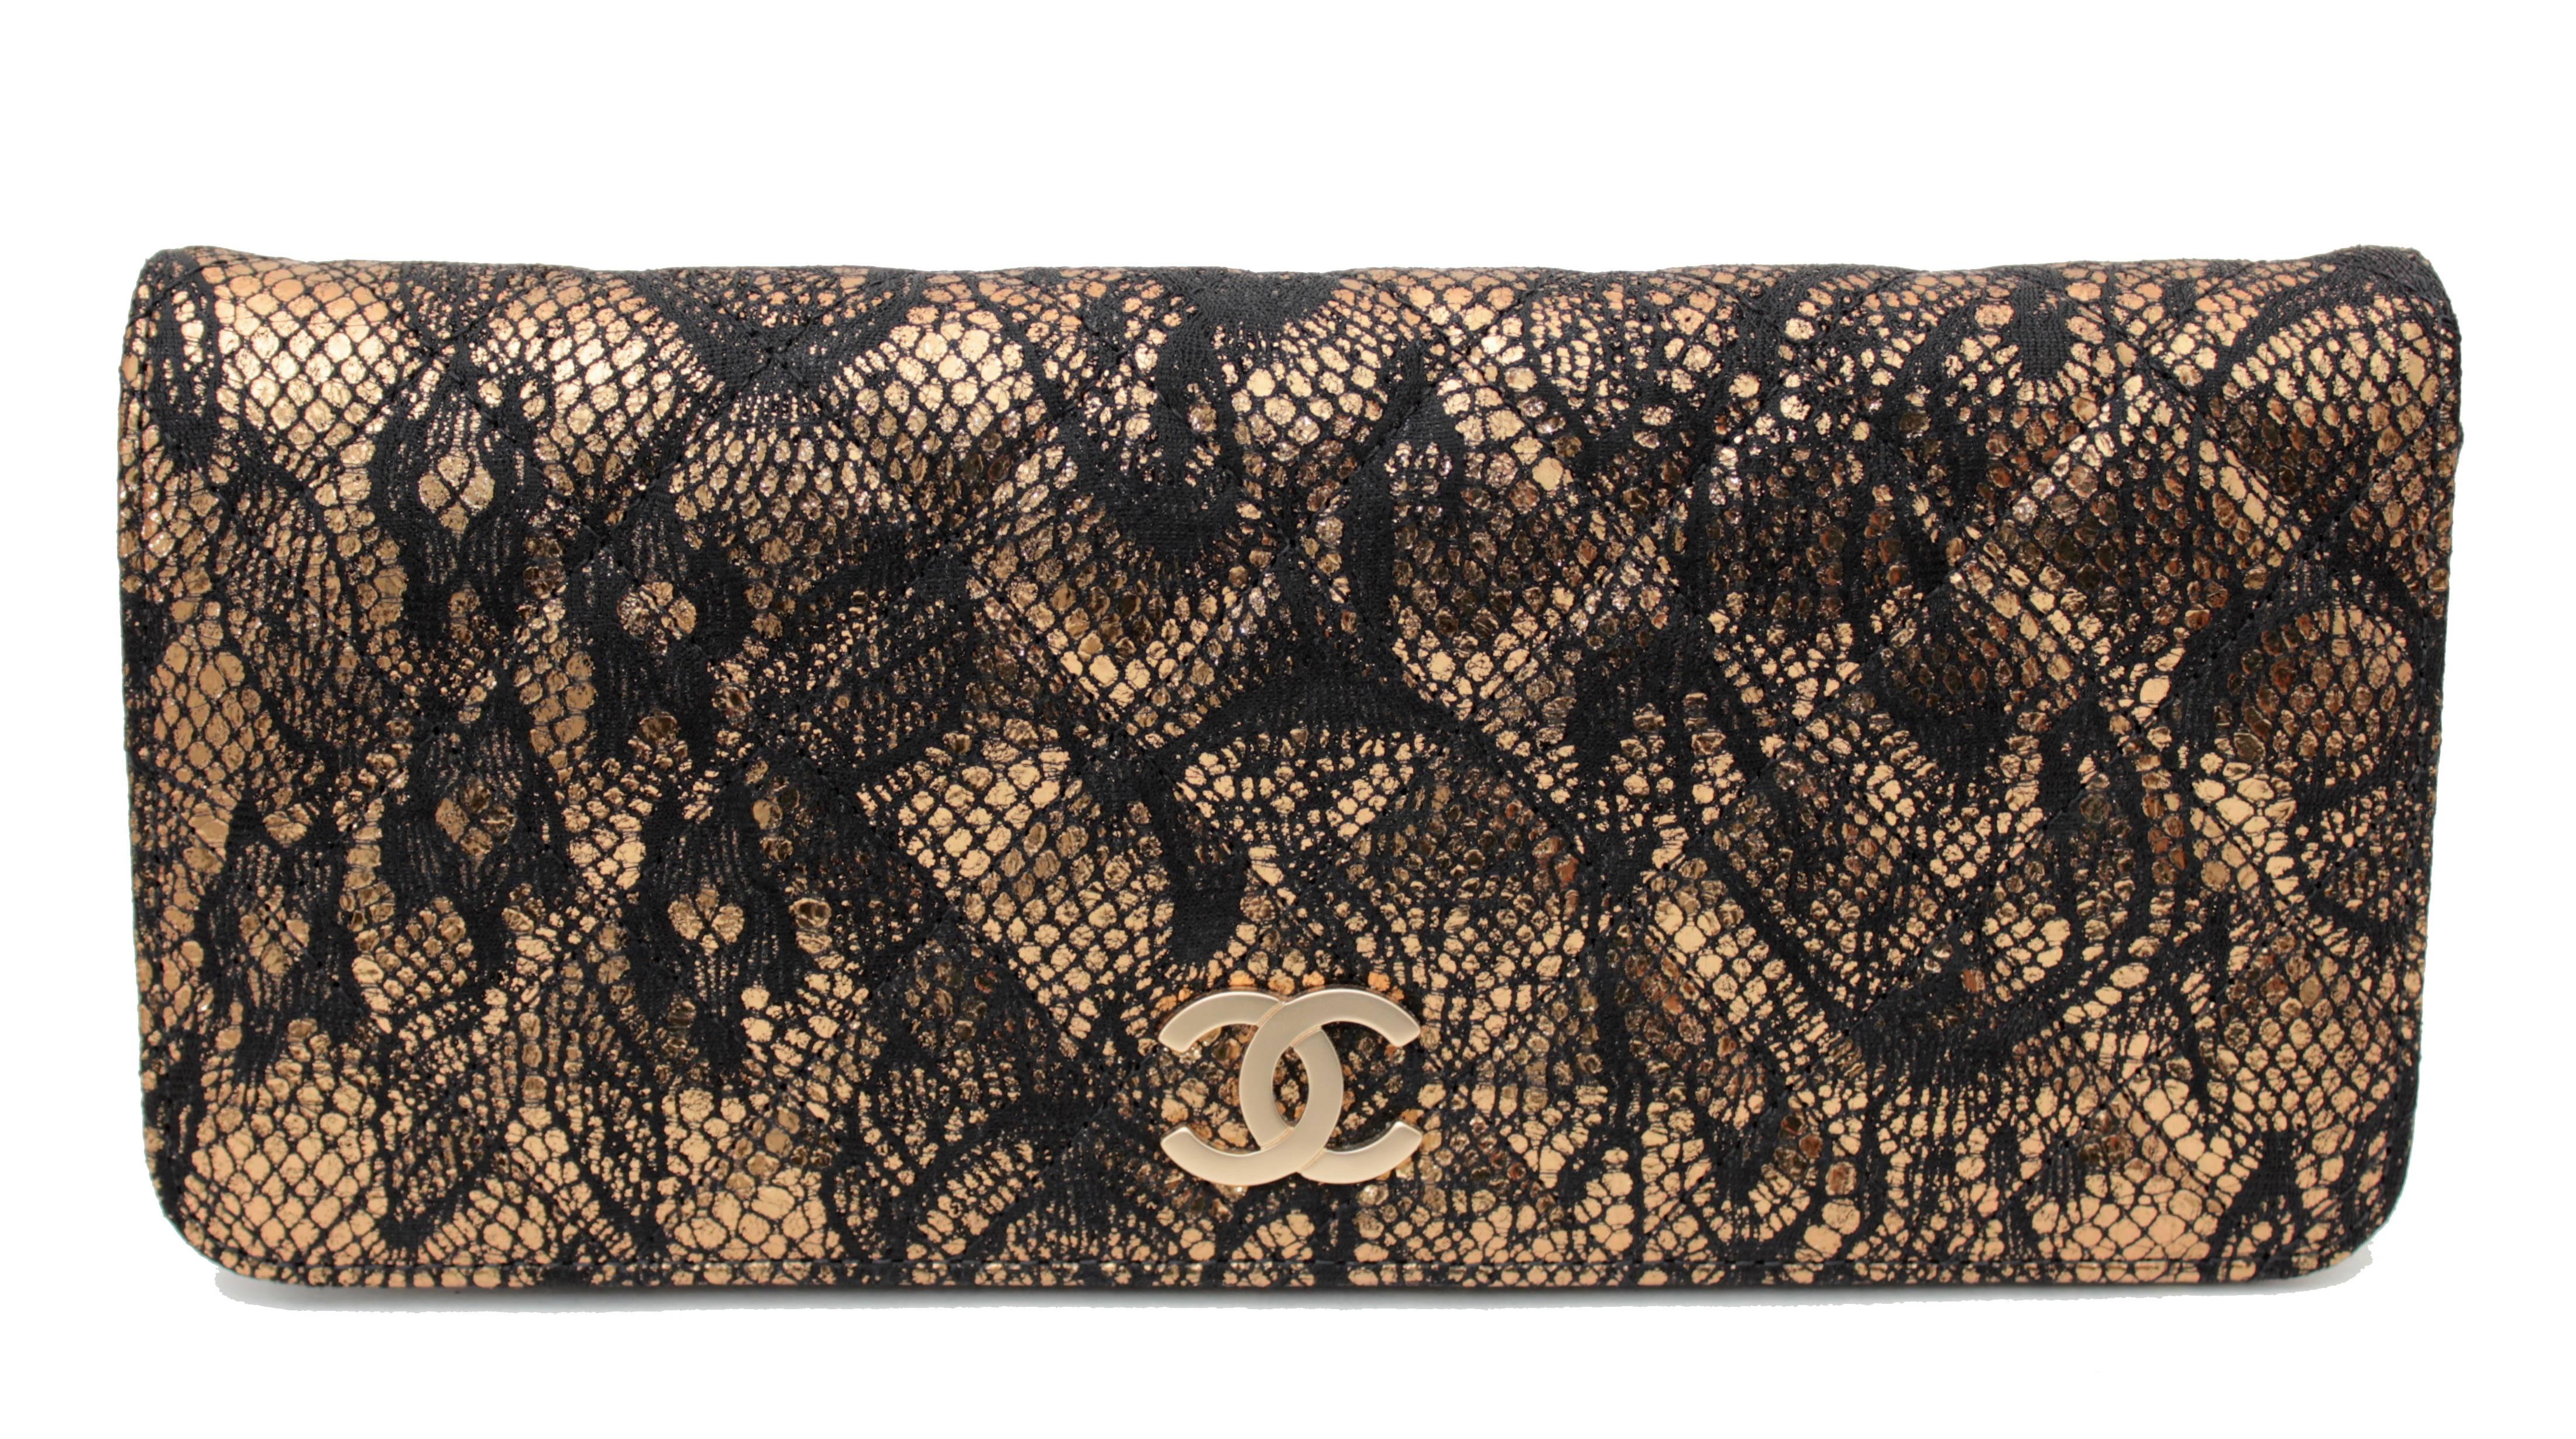 This fabulous metallic leather clutch was made by Chanel between 2010 and 2011, and features a shimmering gold matelasse covered in black lace.  It's lined in black lambskin leather and features one flat pocket two open pockets and one zip